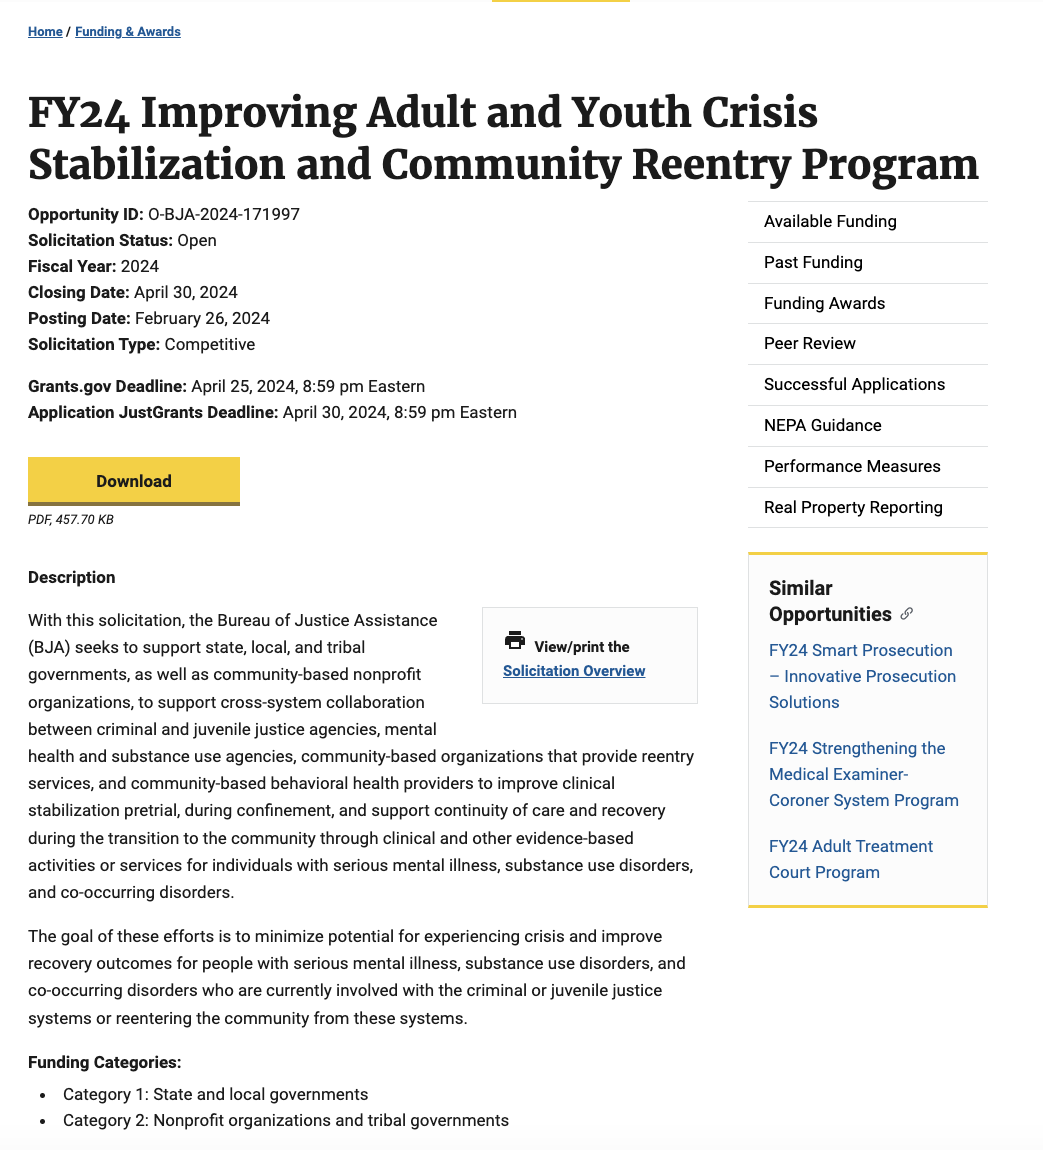 FY24 Improving Adult and Youth Crisis Stabilization and Community Reentry Program